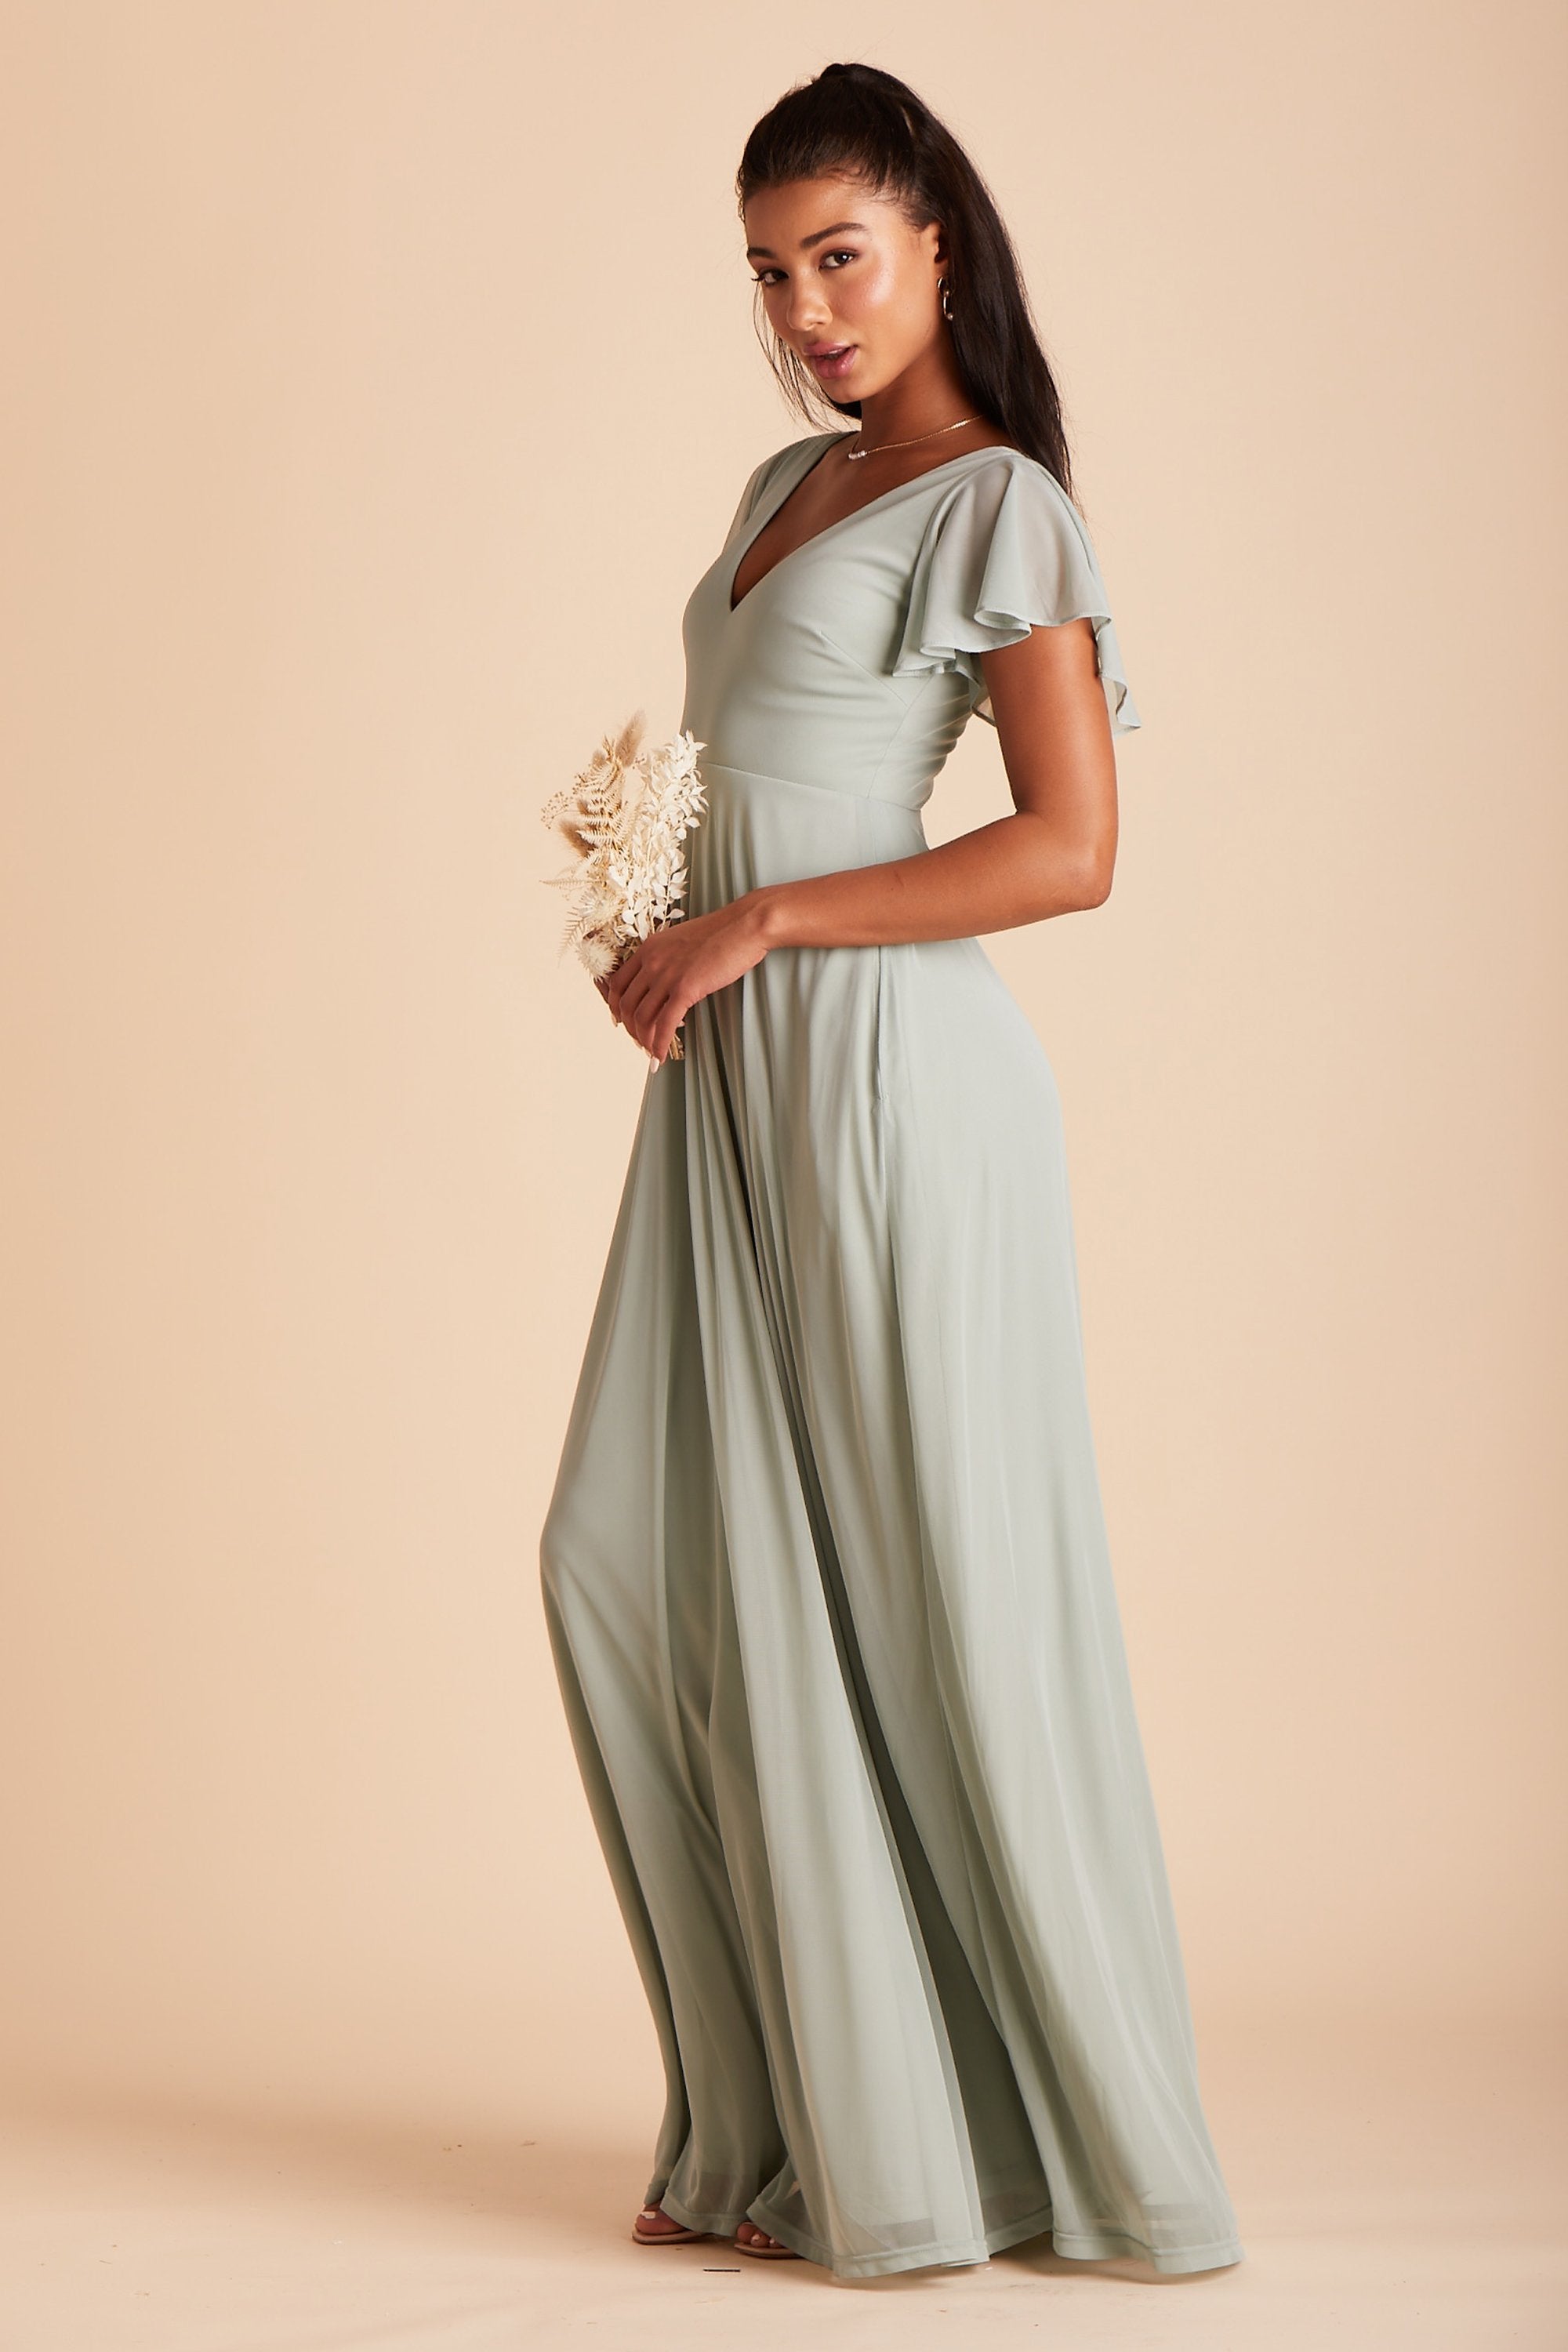 Hannah bridesmaids dress in sage green mesh by Birdy Grey, side view